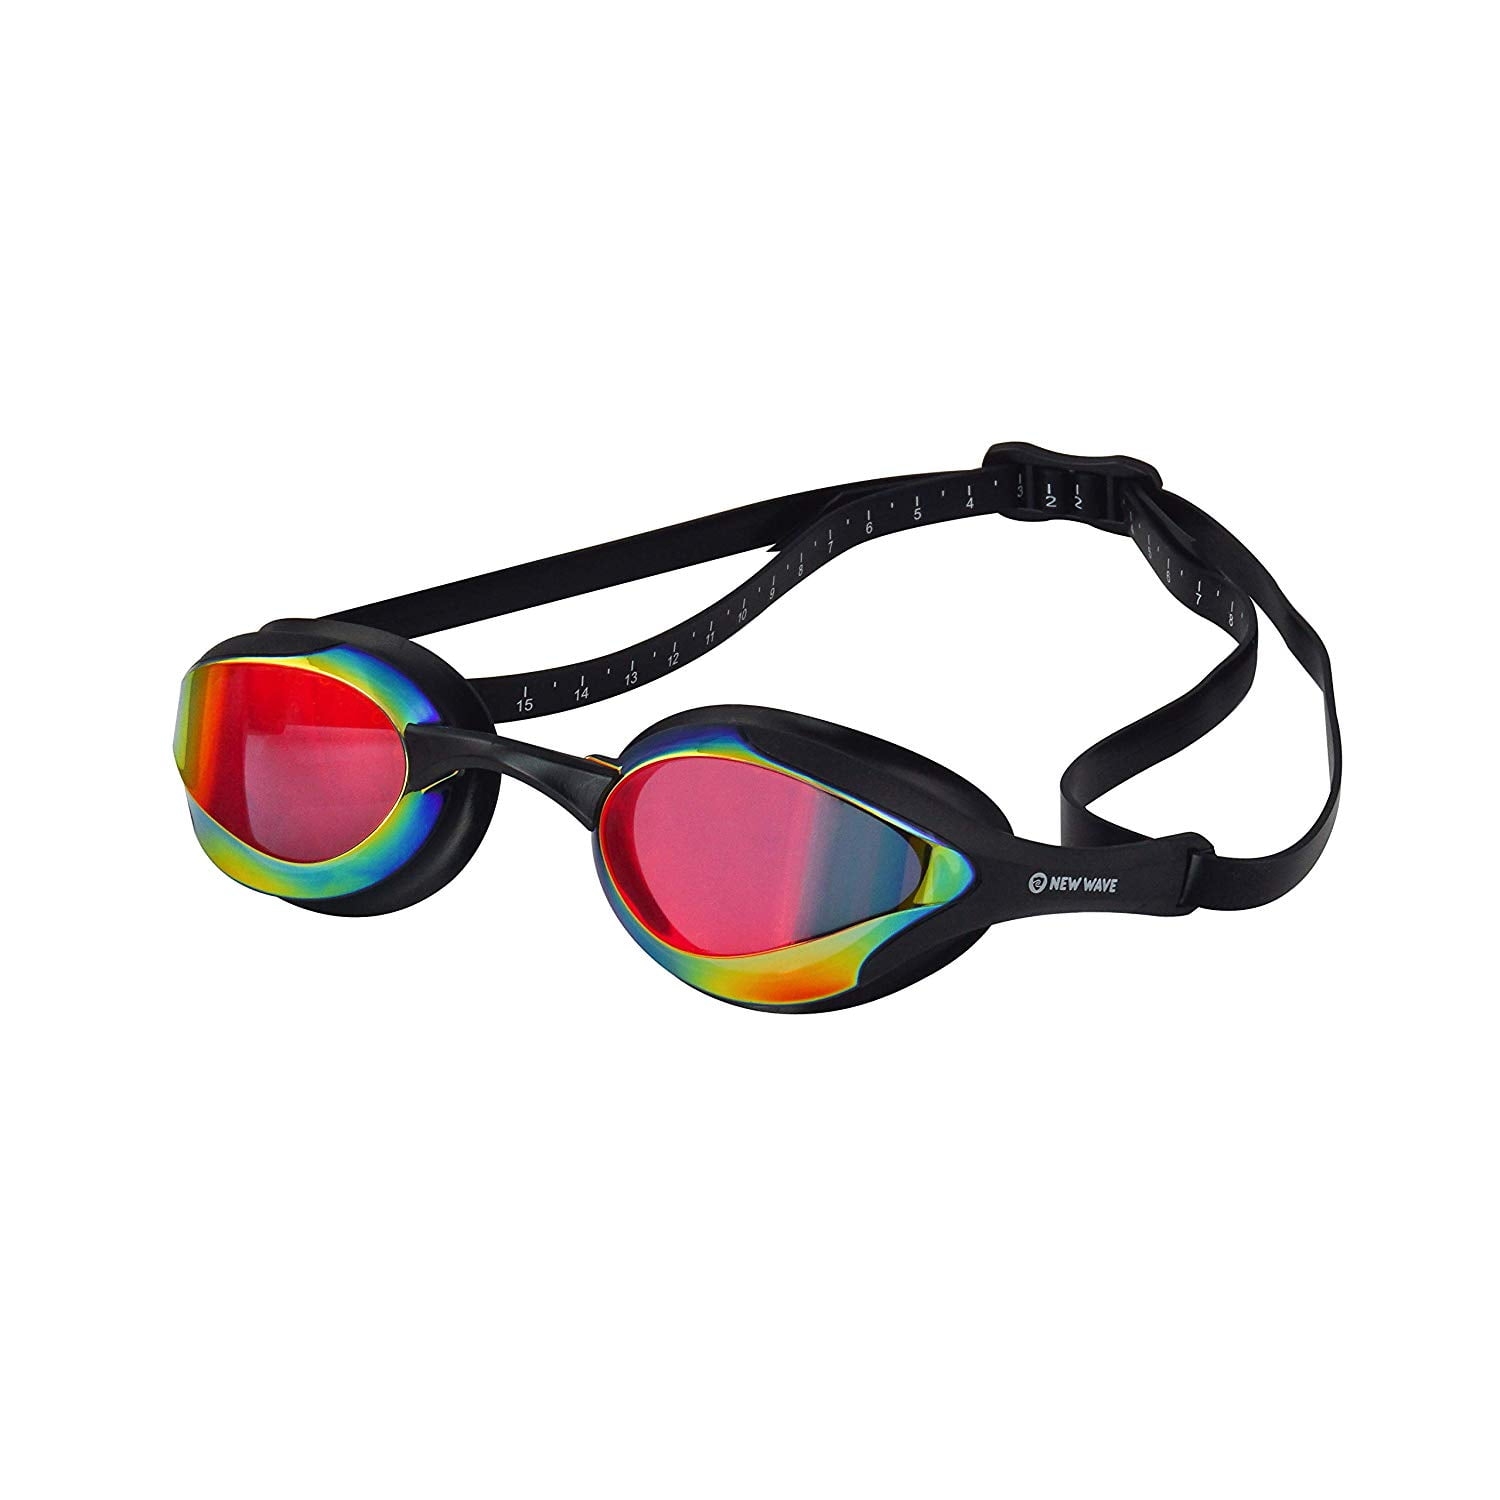 Barracuda Swim Goggles Manta Easy Adjusting Oversize Triathlon Open Water One-Piece Frame Quick-fit No Leaking Comfortable for Adults Men Women #13520 Anti-Fog UV Protection